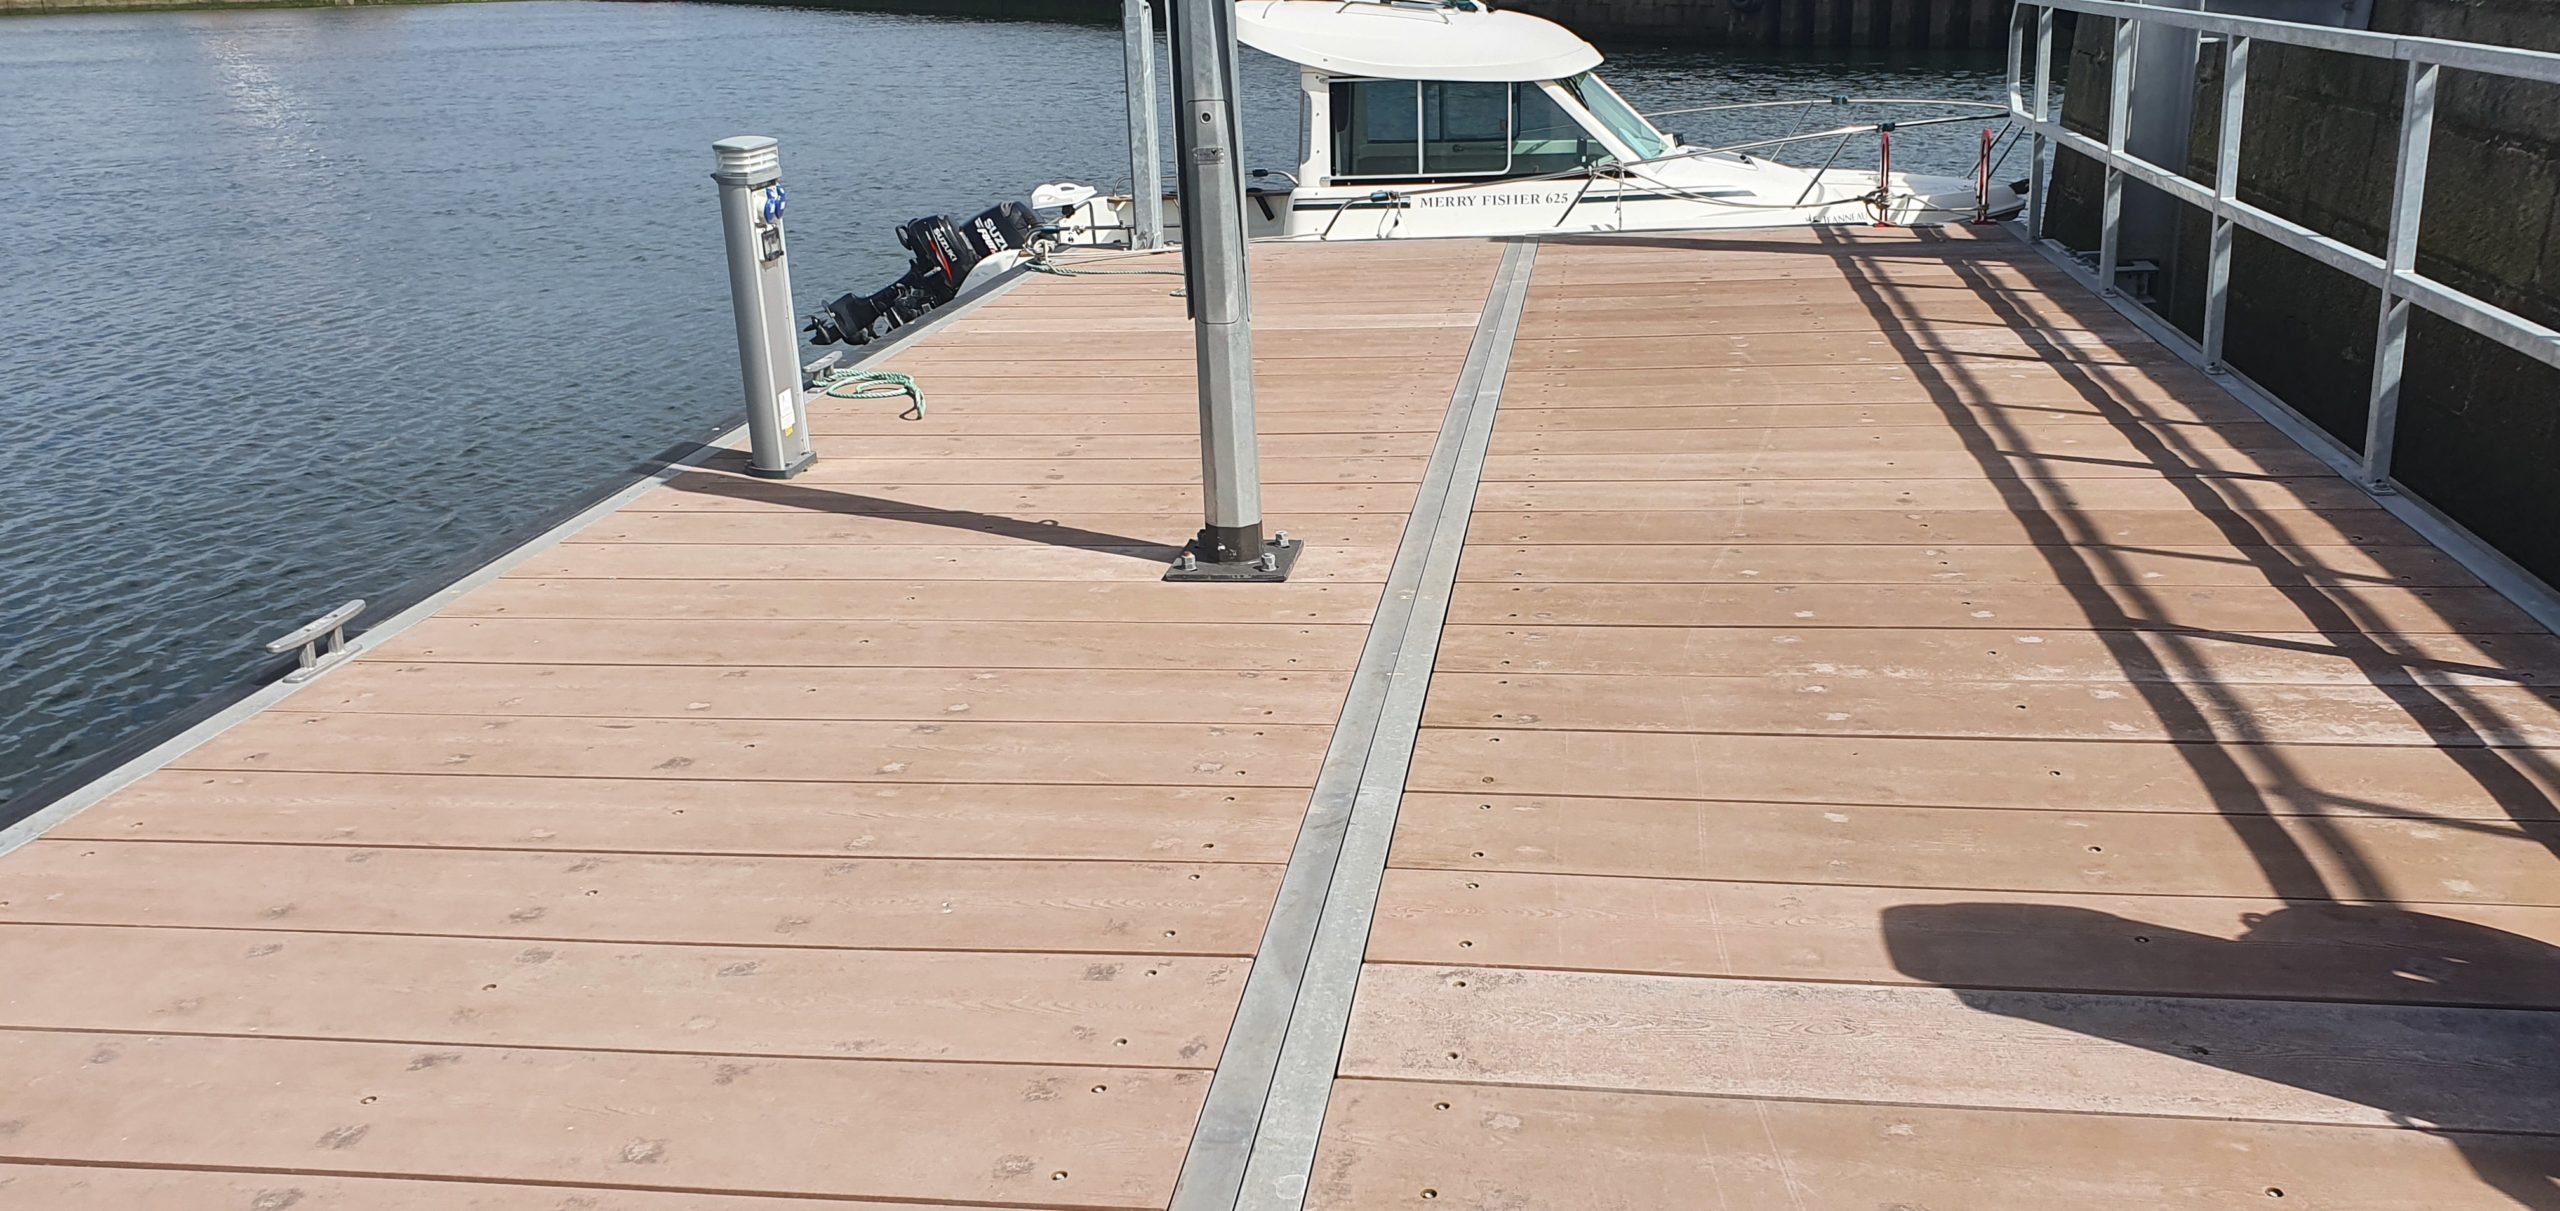 Marina pontoon with railing on right hand side and small power boat moored to the end